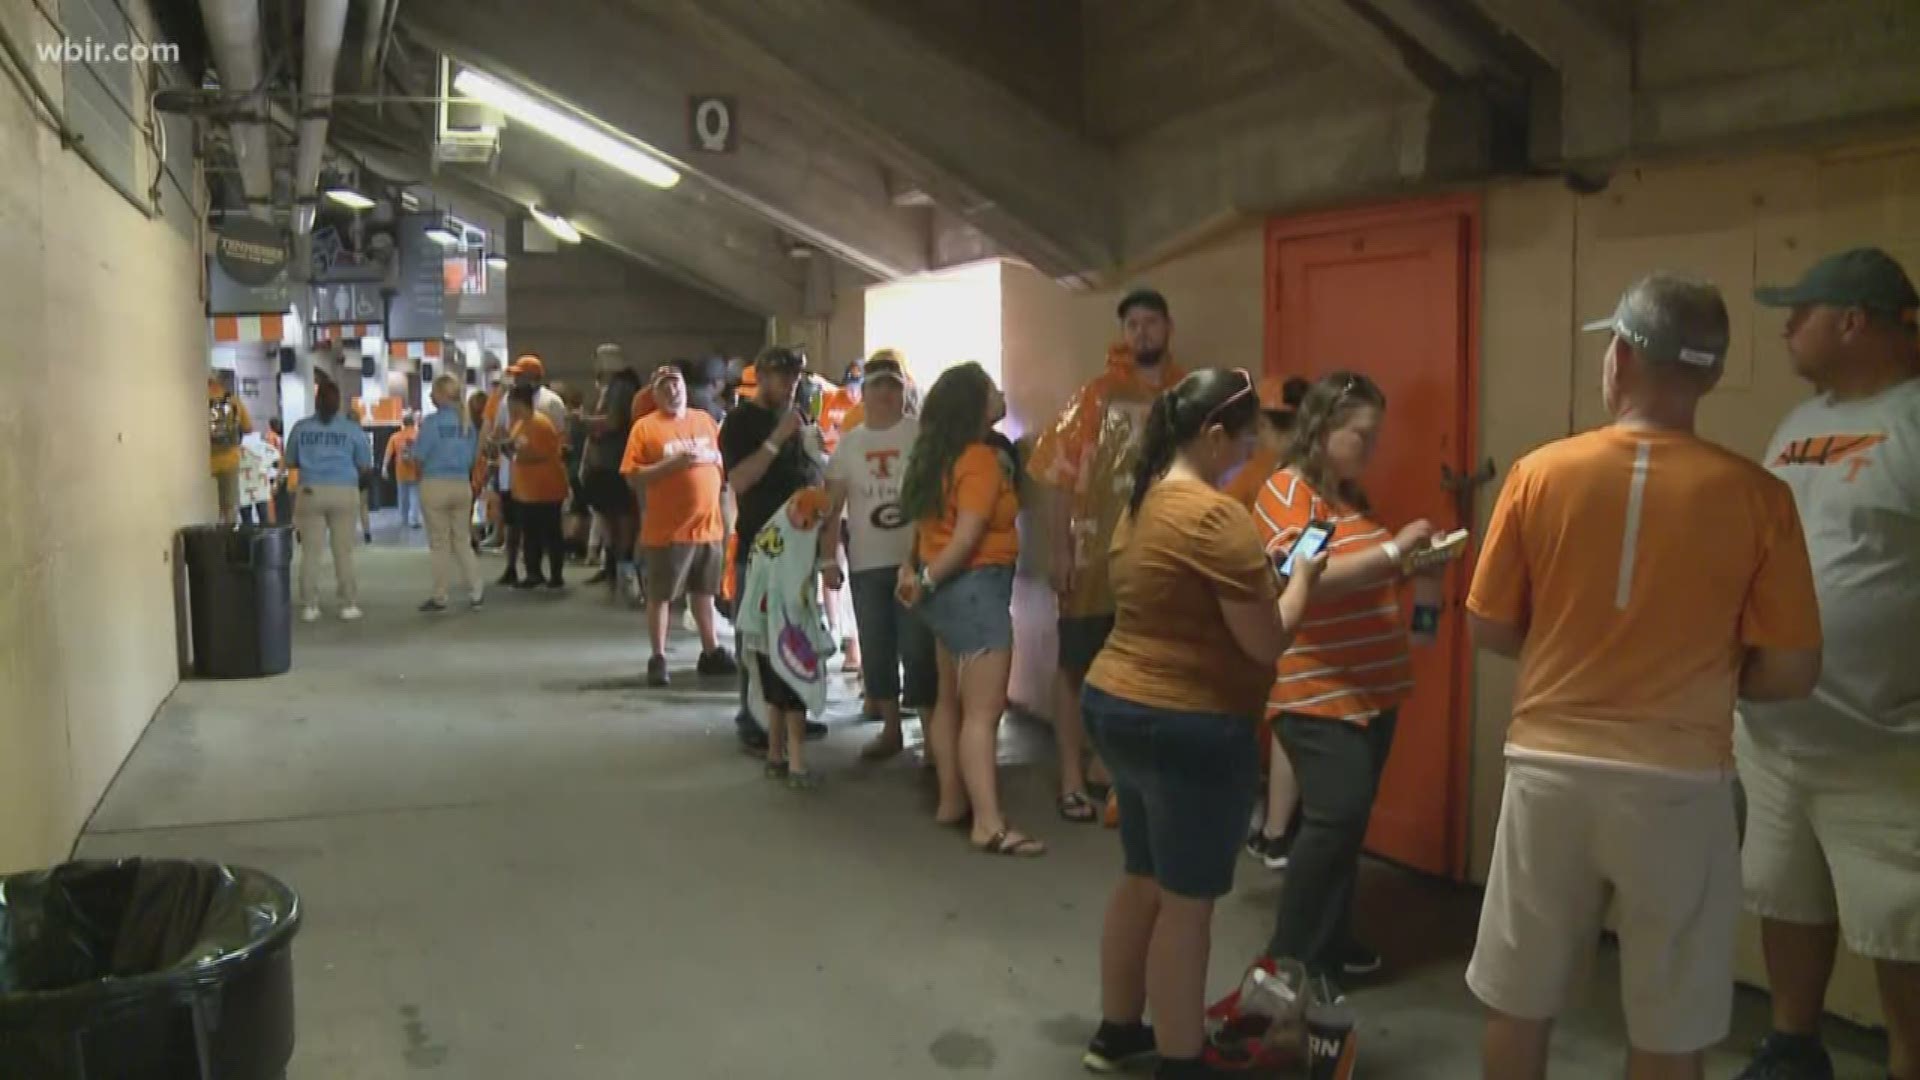 It's a sad day for a lot of Vols fans on Rocky Top who showed up to see the Fan Day open practice.